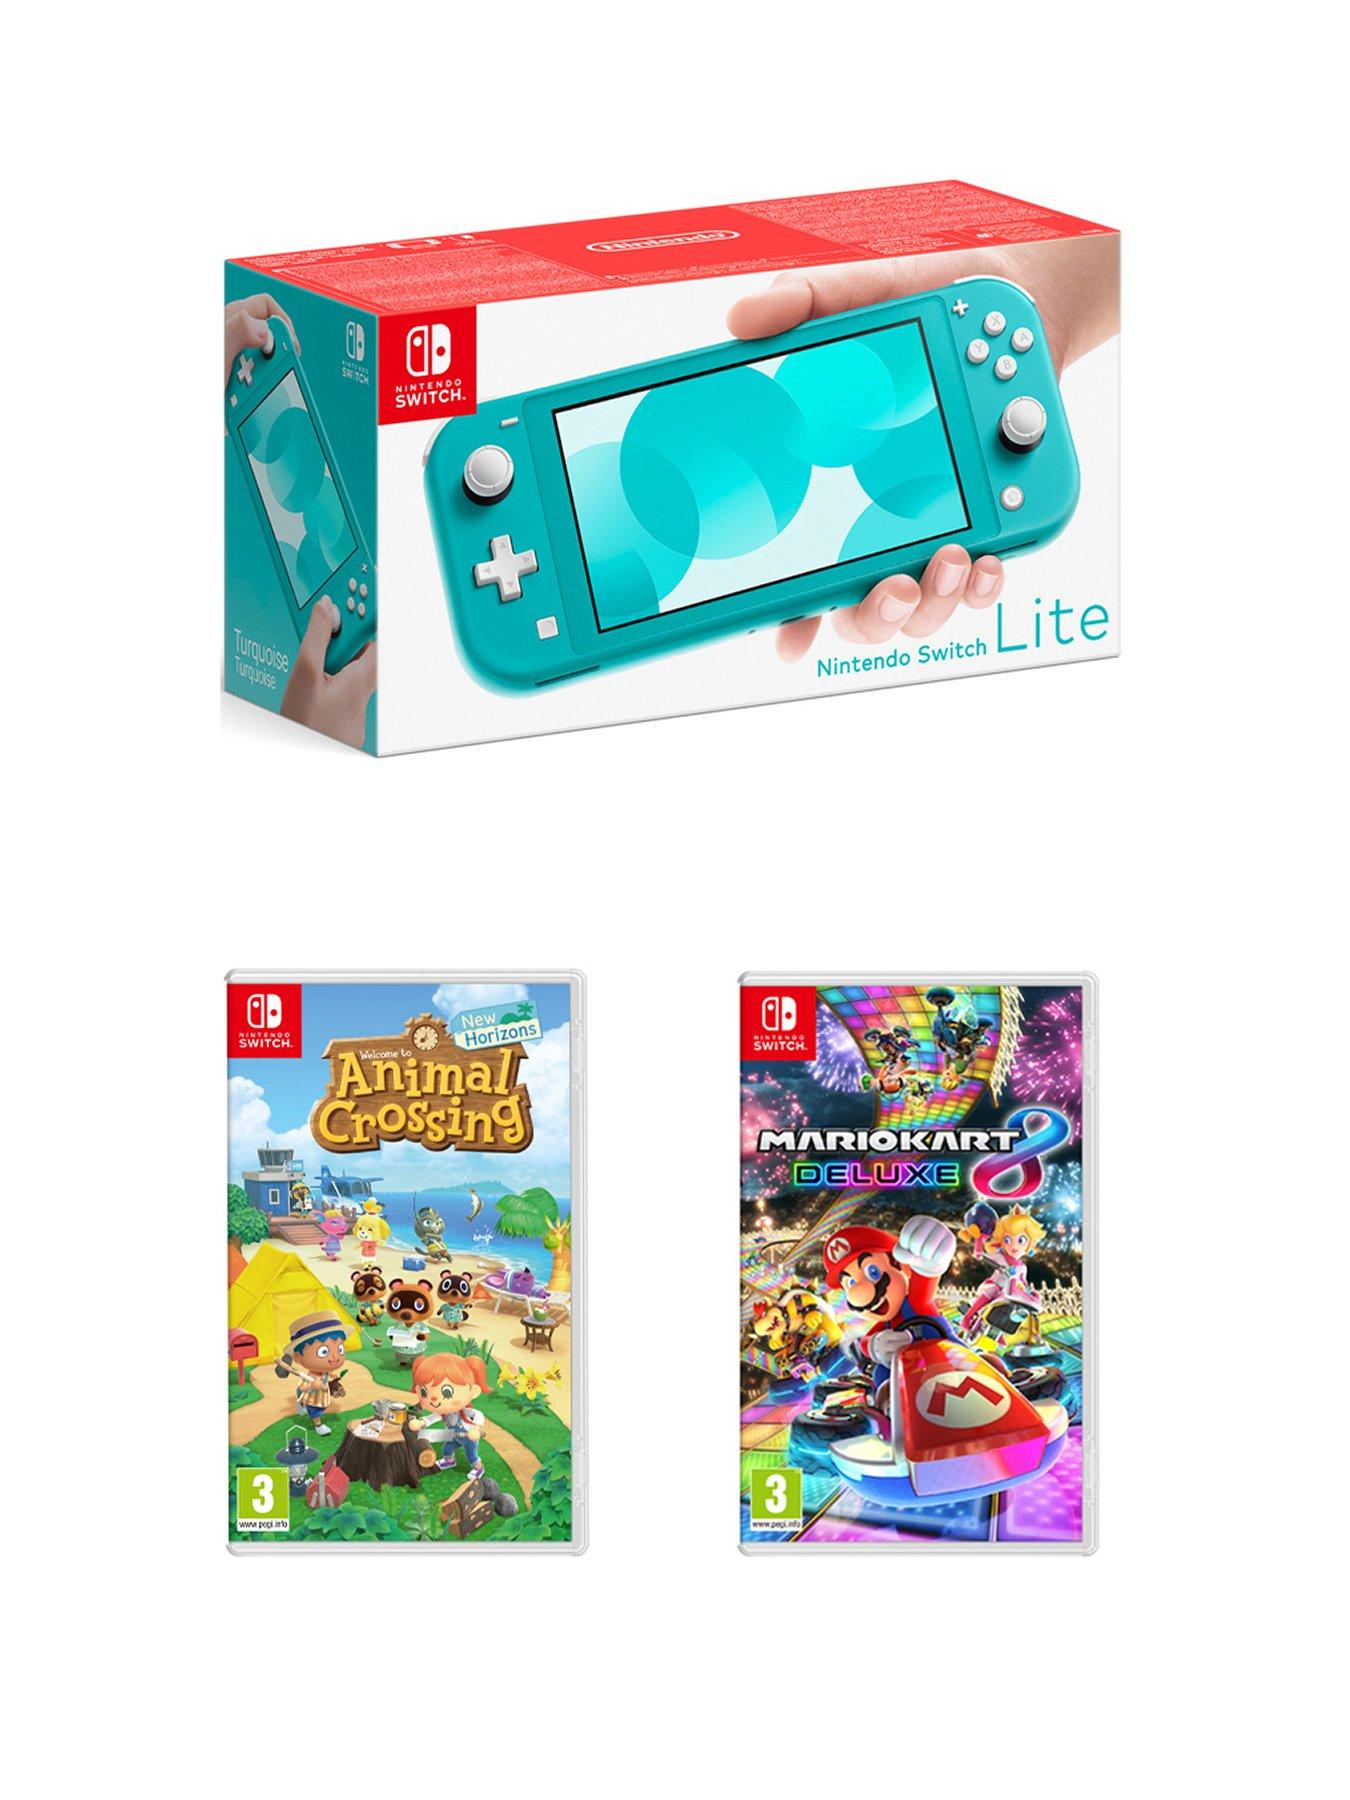 animal crossing and nintendo switch lite